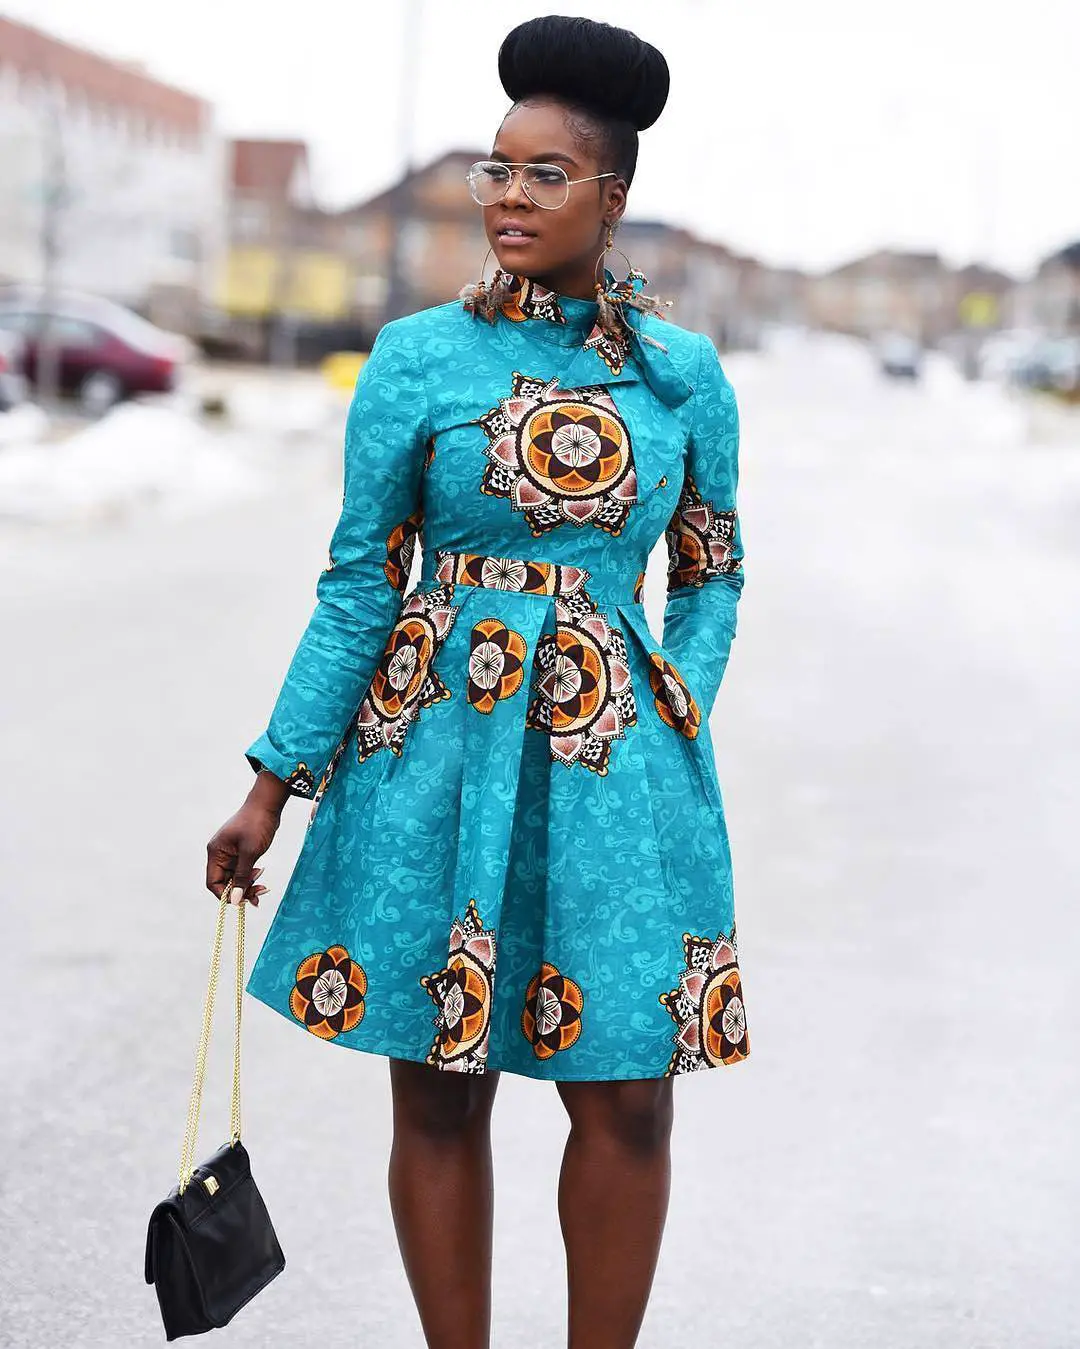  Keeping The Ankara Styles Simple And Sweet